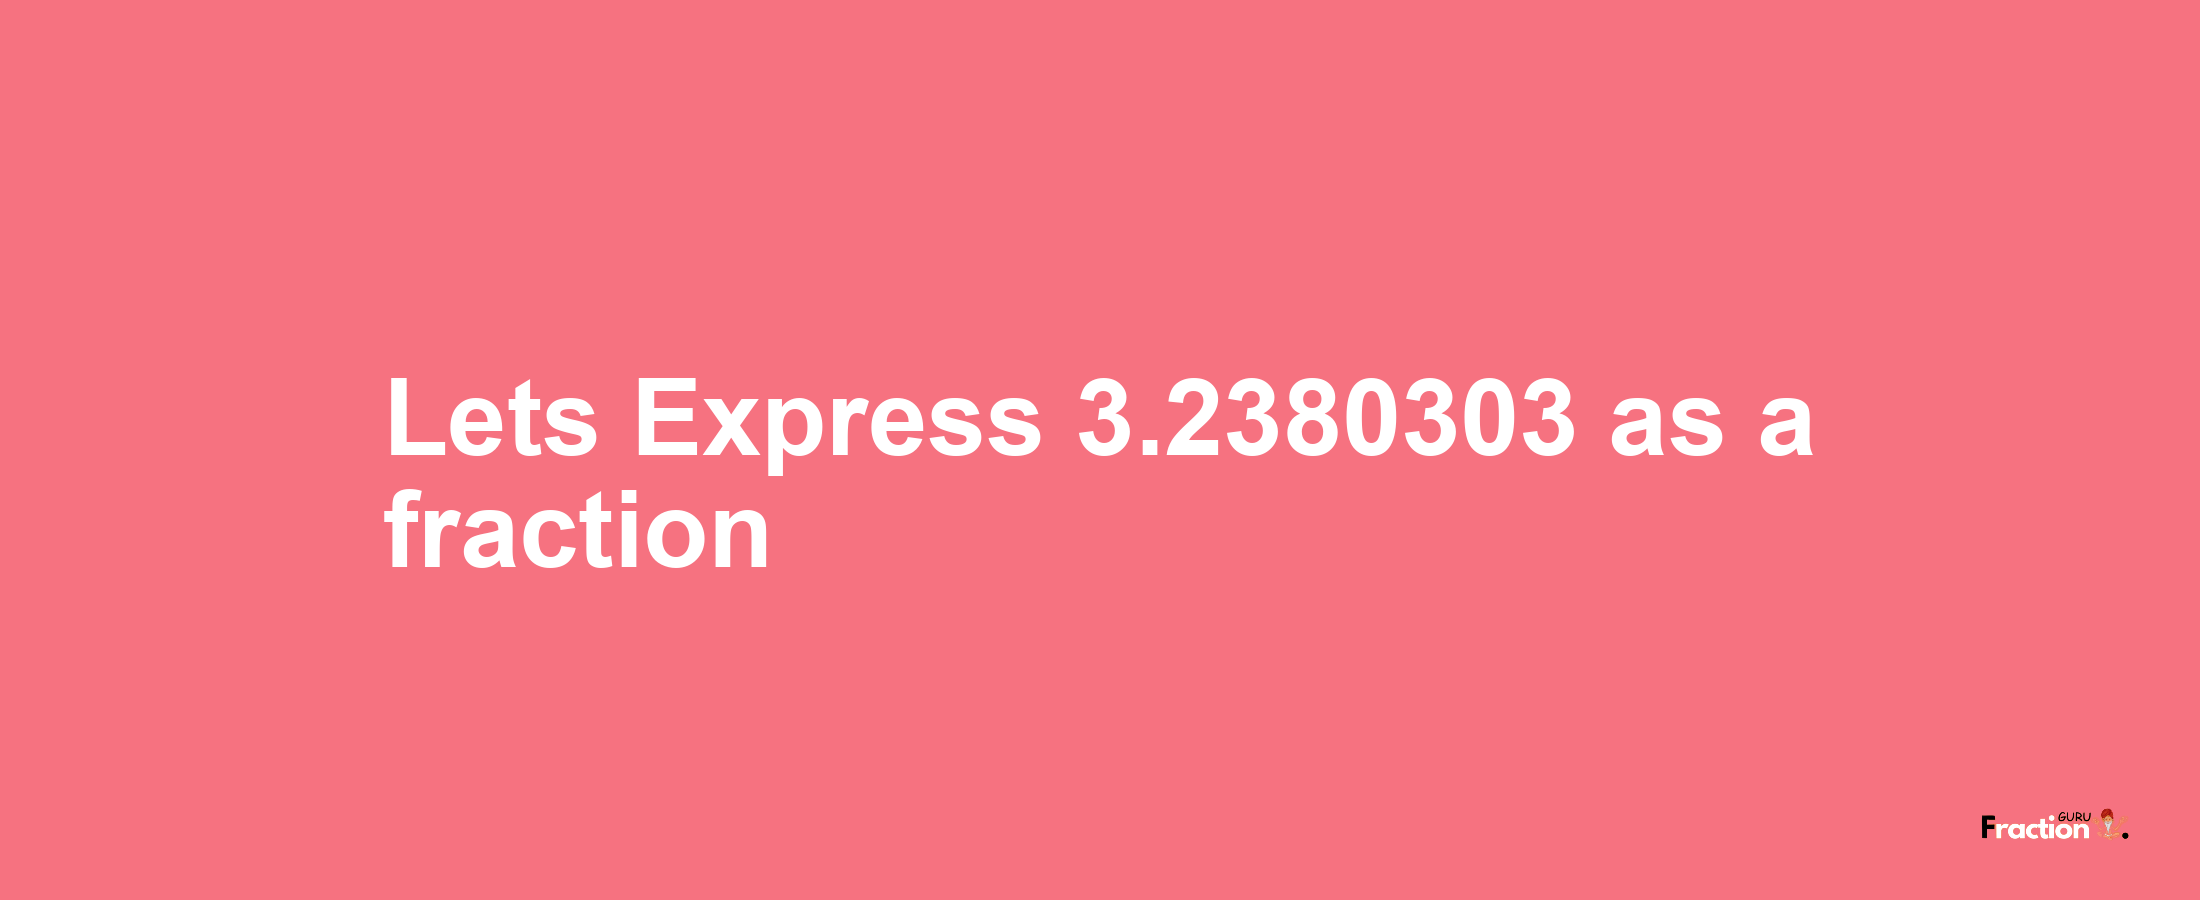 Lets Express 3.2380303 as afraction